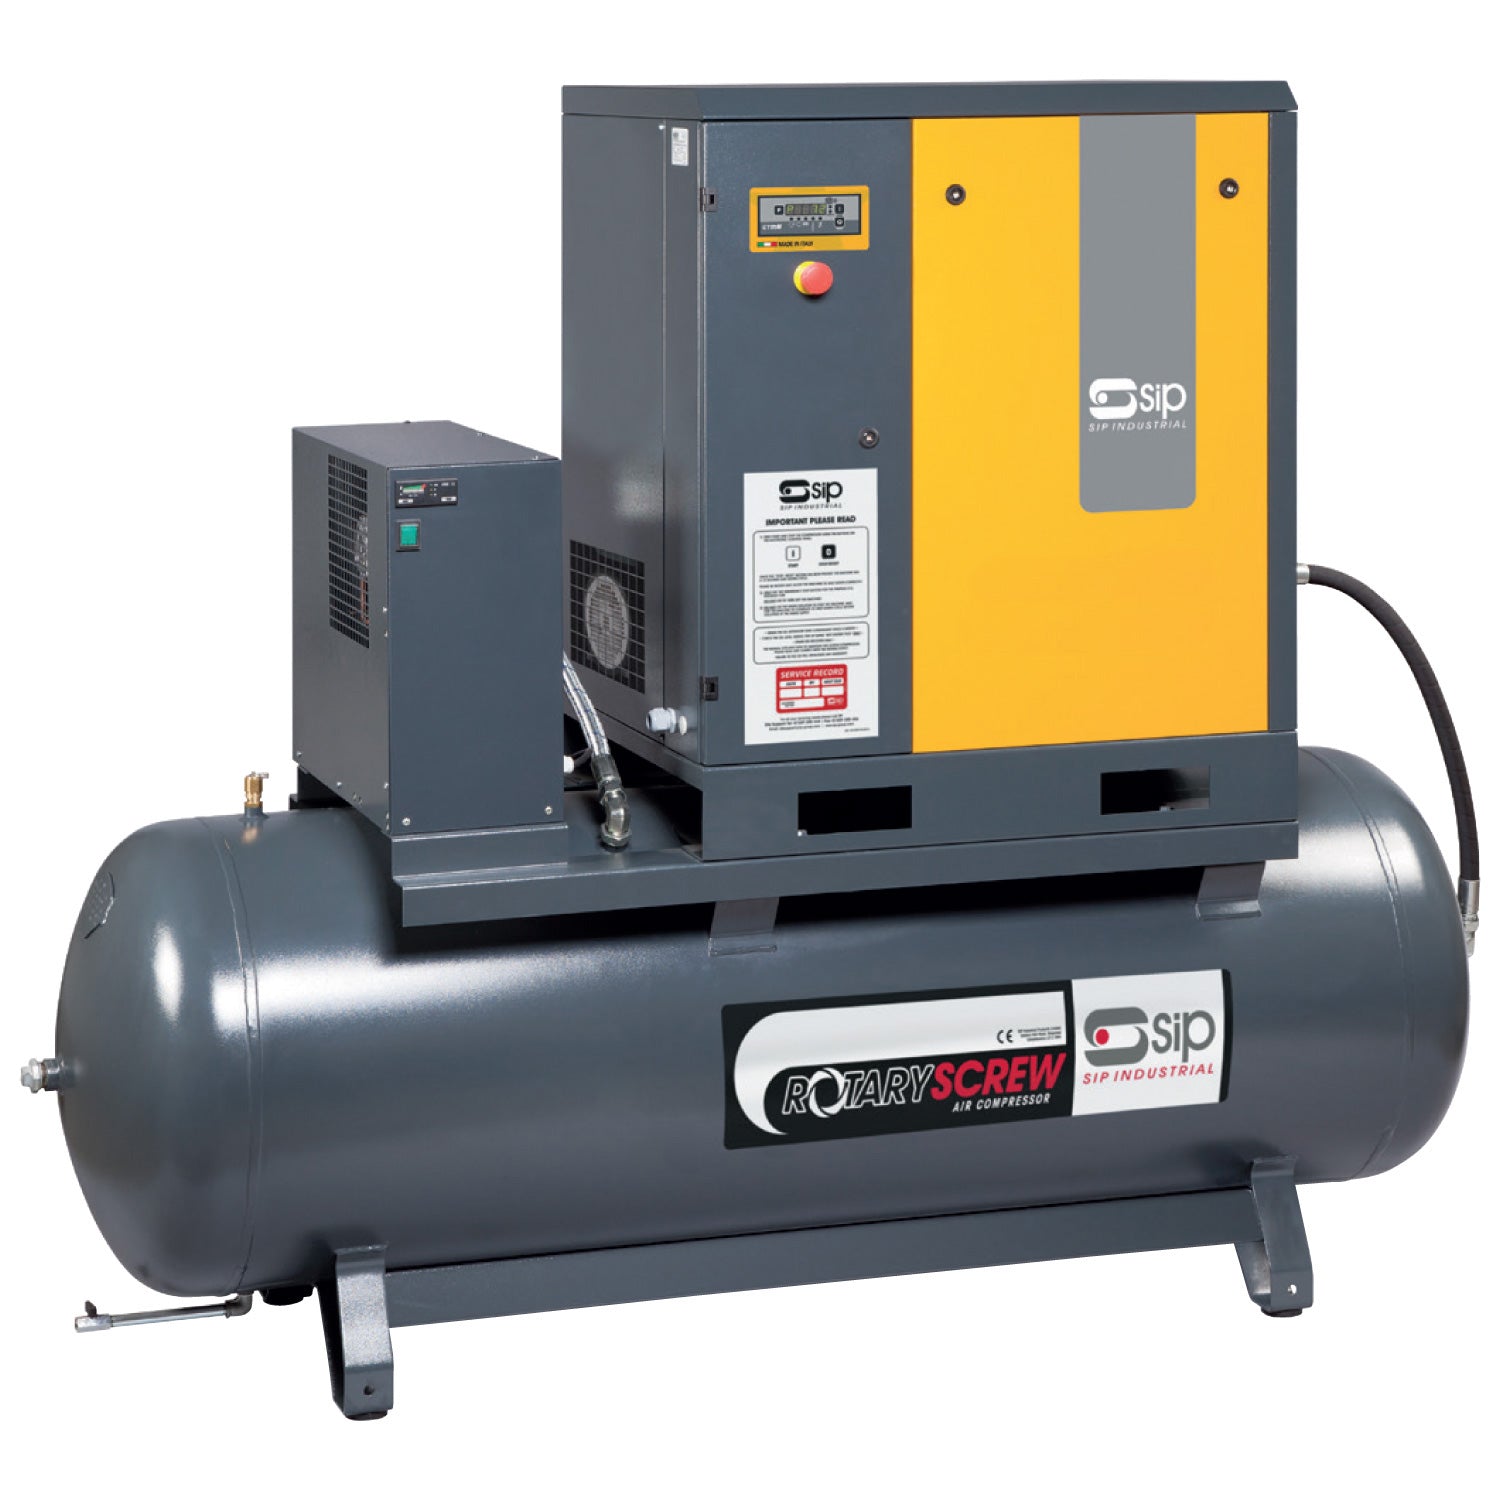 SIP RS08-08-270BD/RD 270ltr Rotary Screw Compressor with Dryer, Sip Industrial